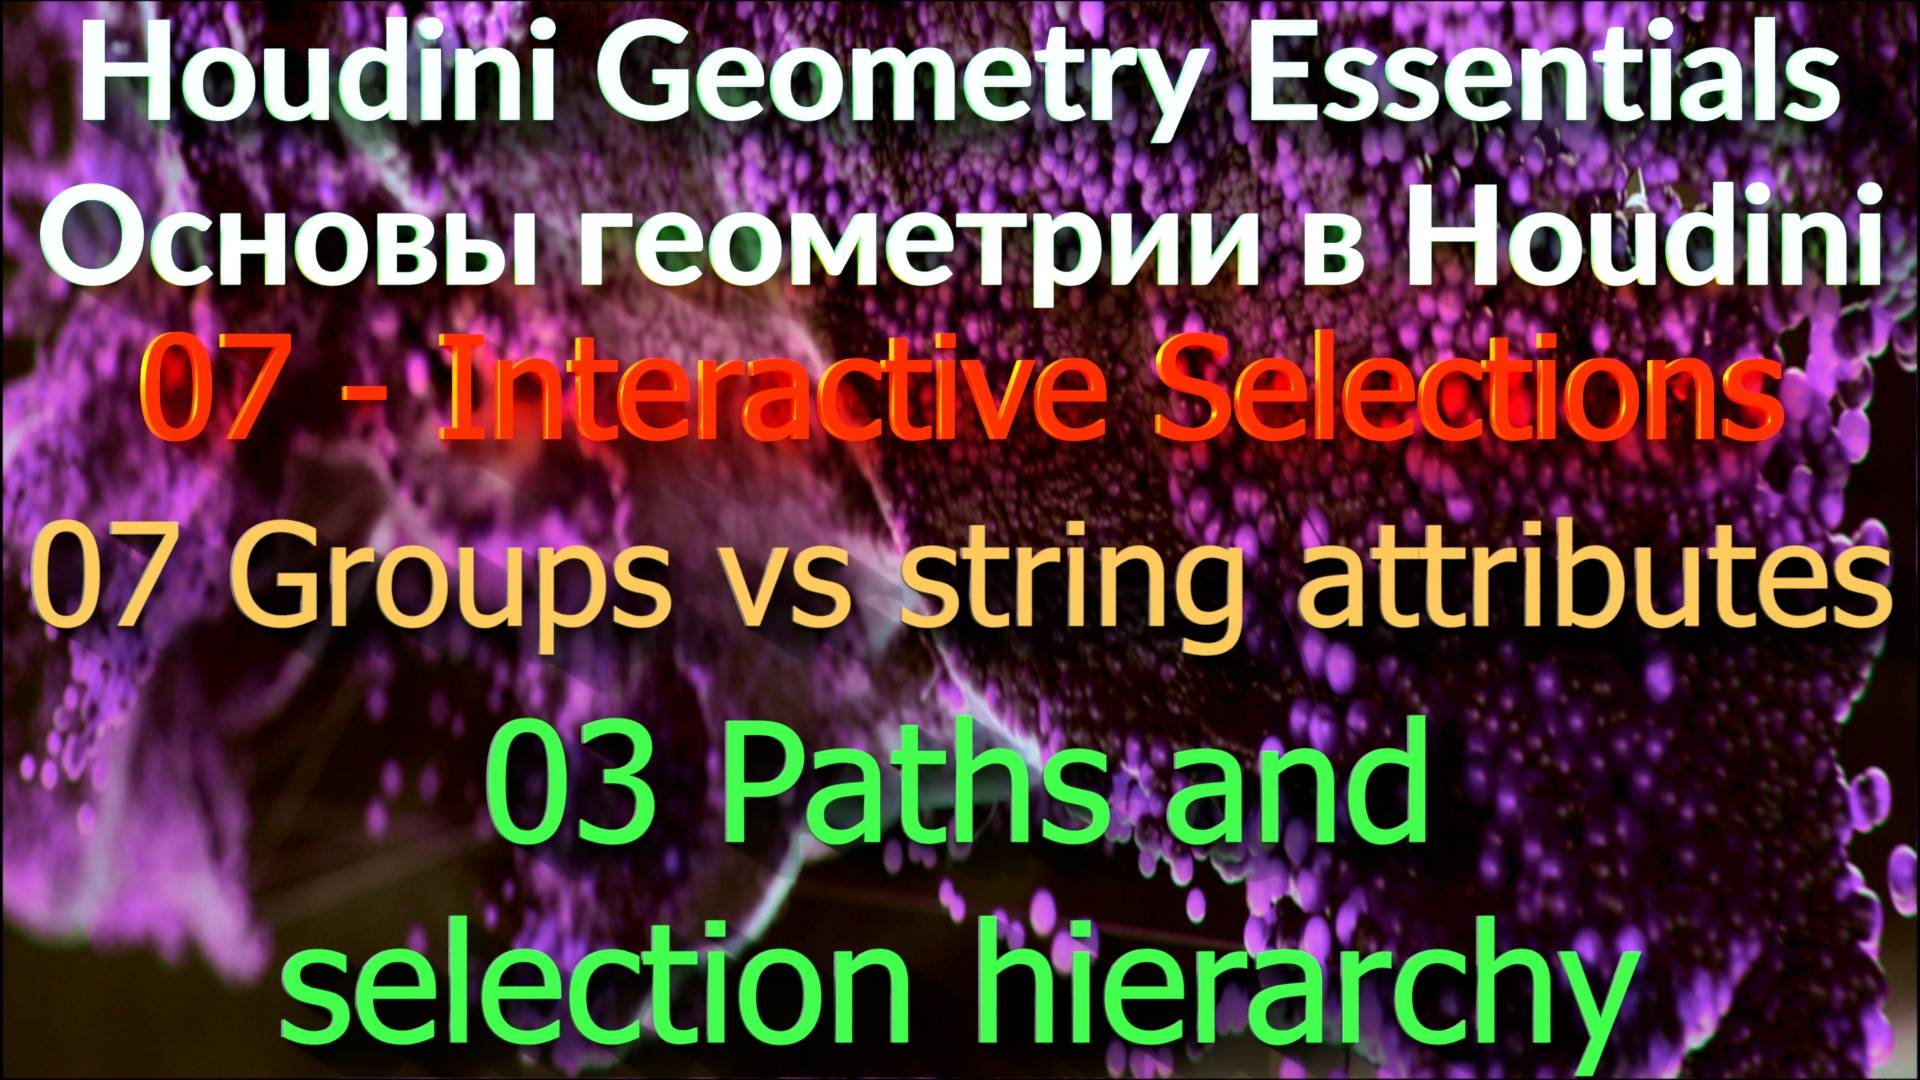 07_07_03 Paths and selection hierarchy